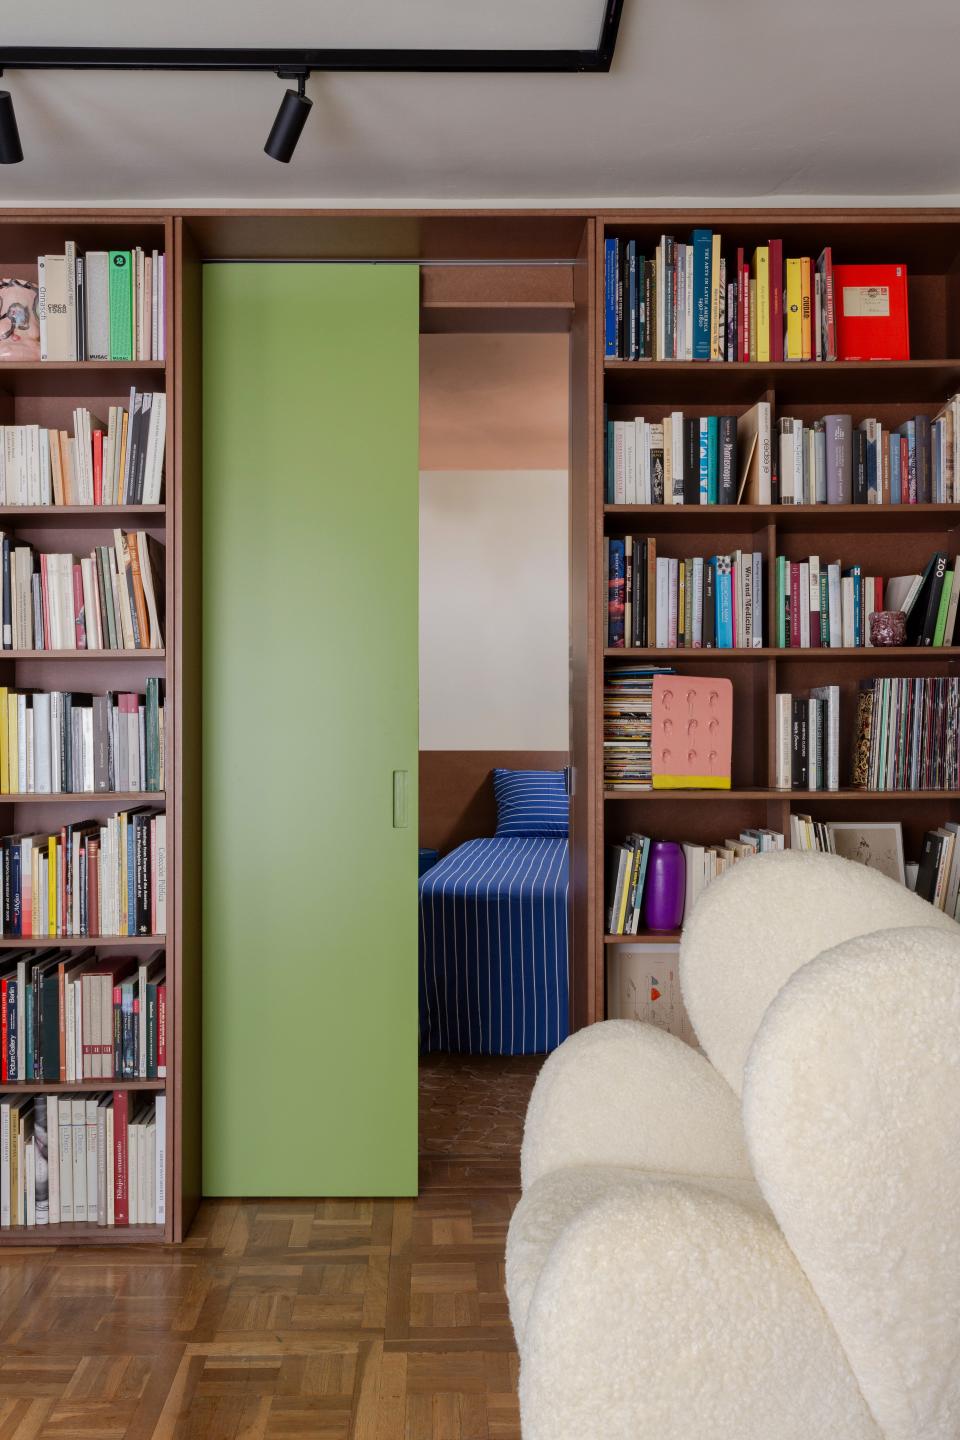 The relationship between this entry, the living room, and the primary bedroom was reimagined thanks to a custom bookshelf that provided order to the floor plan and gave structure to the apartment’s layout.